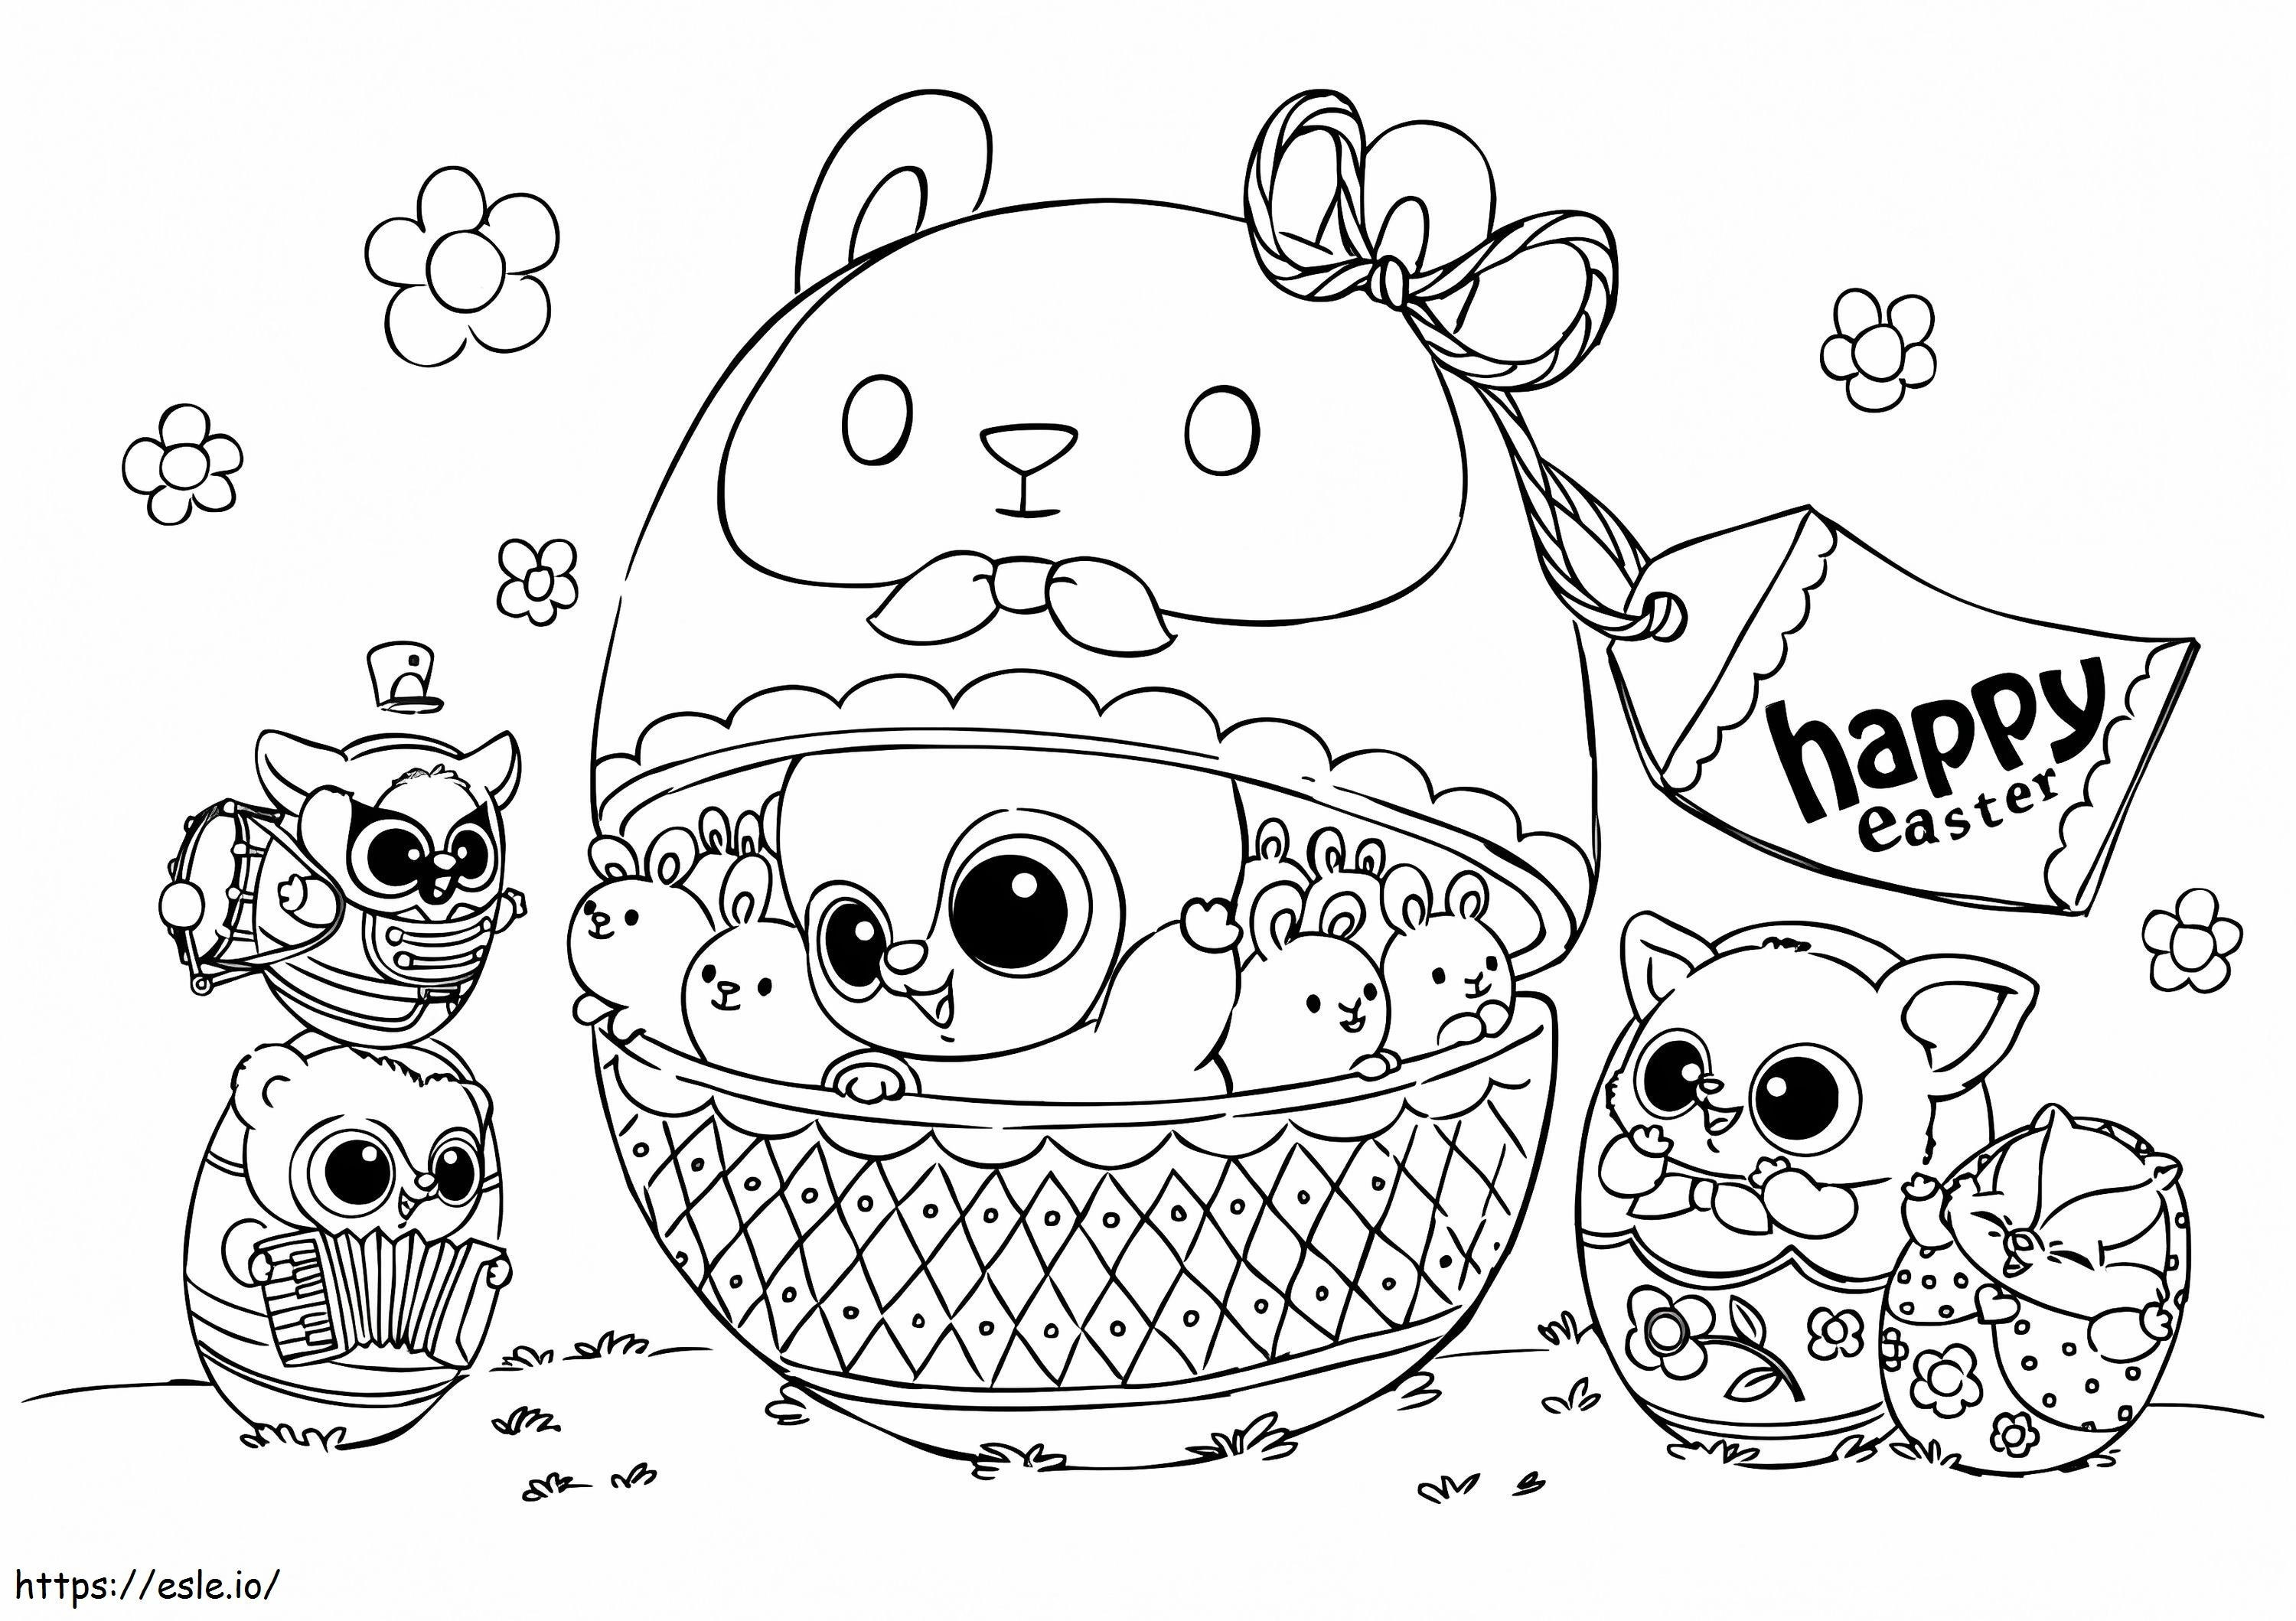 YooHoo And Friends On Easter coloring page